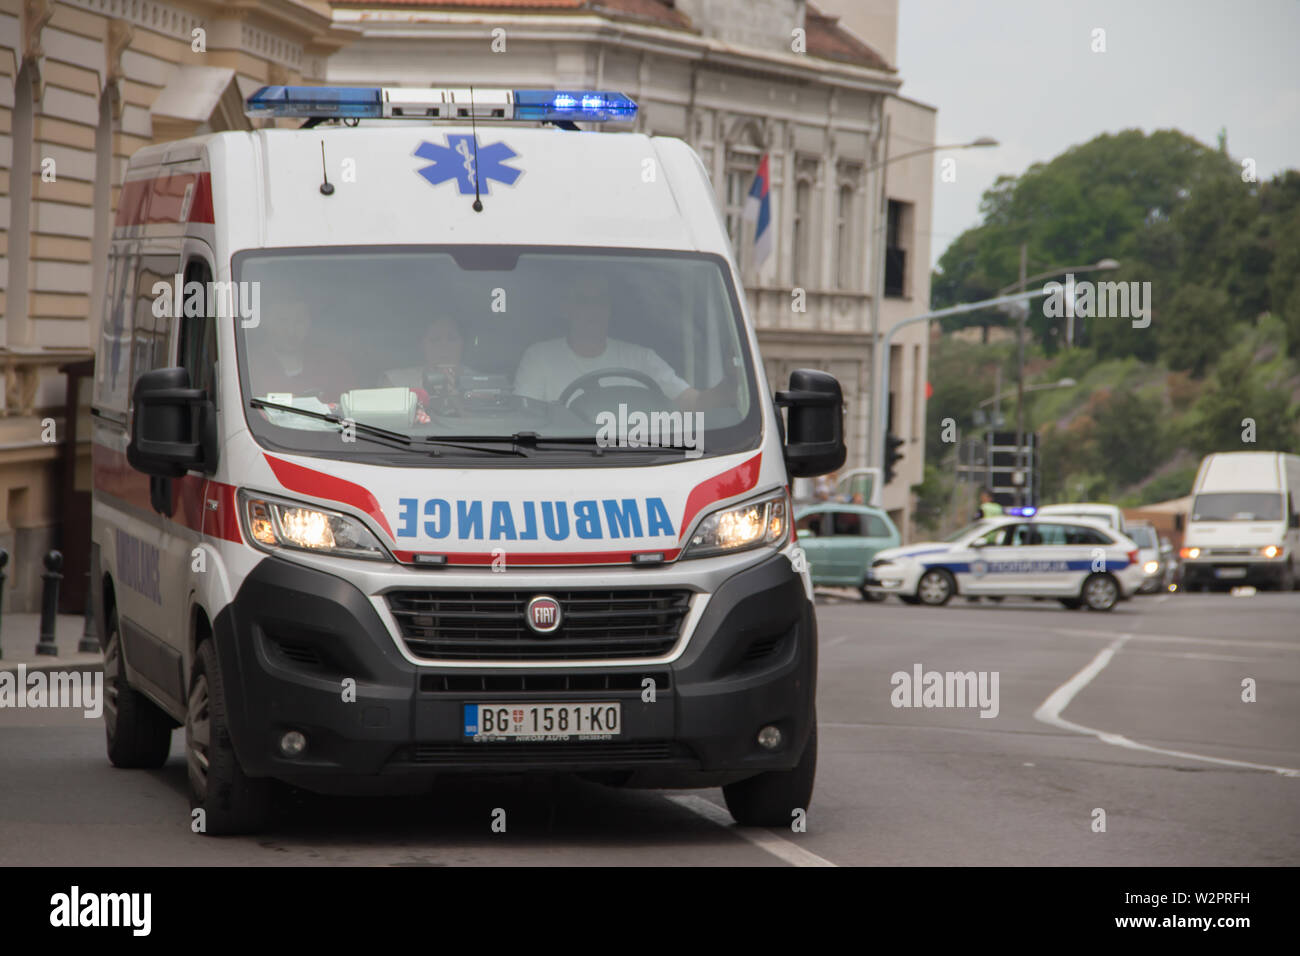 Ambulance vehicle on the street, with Police in background, securing public event in Belgrade Stock Photo